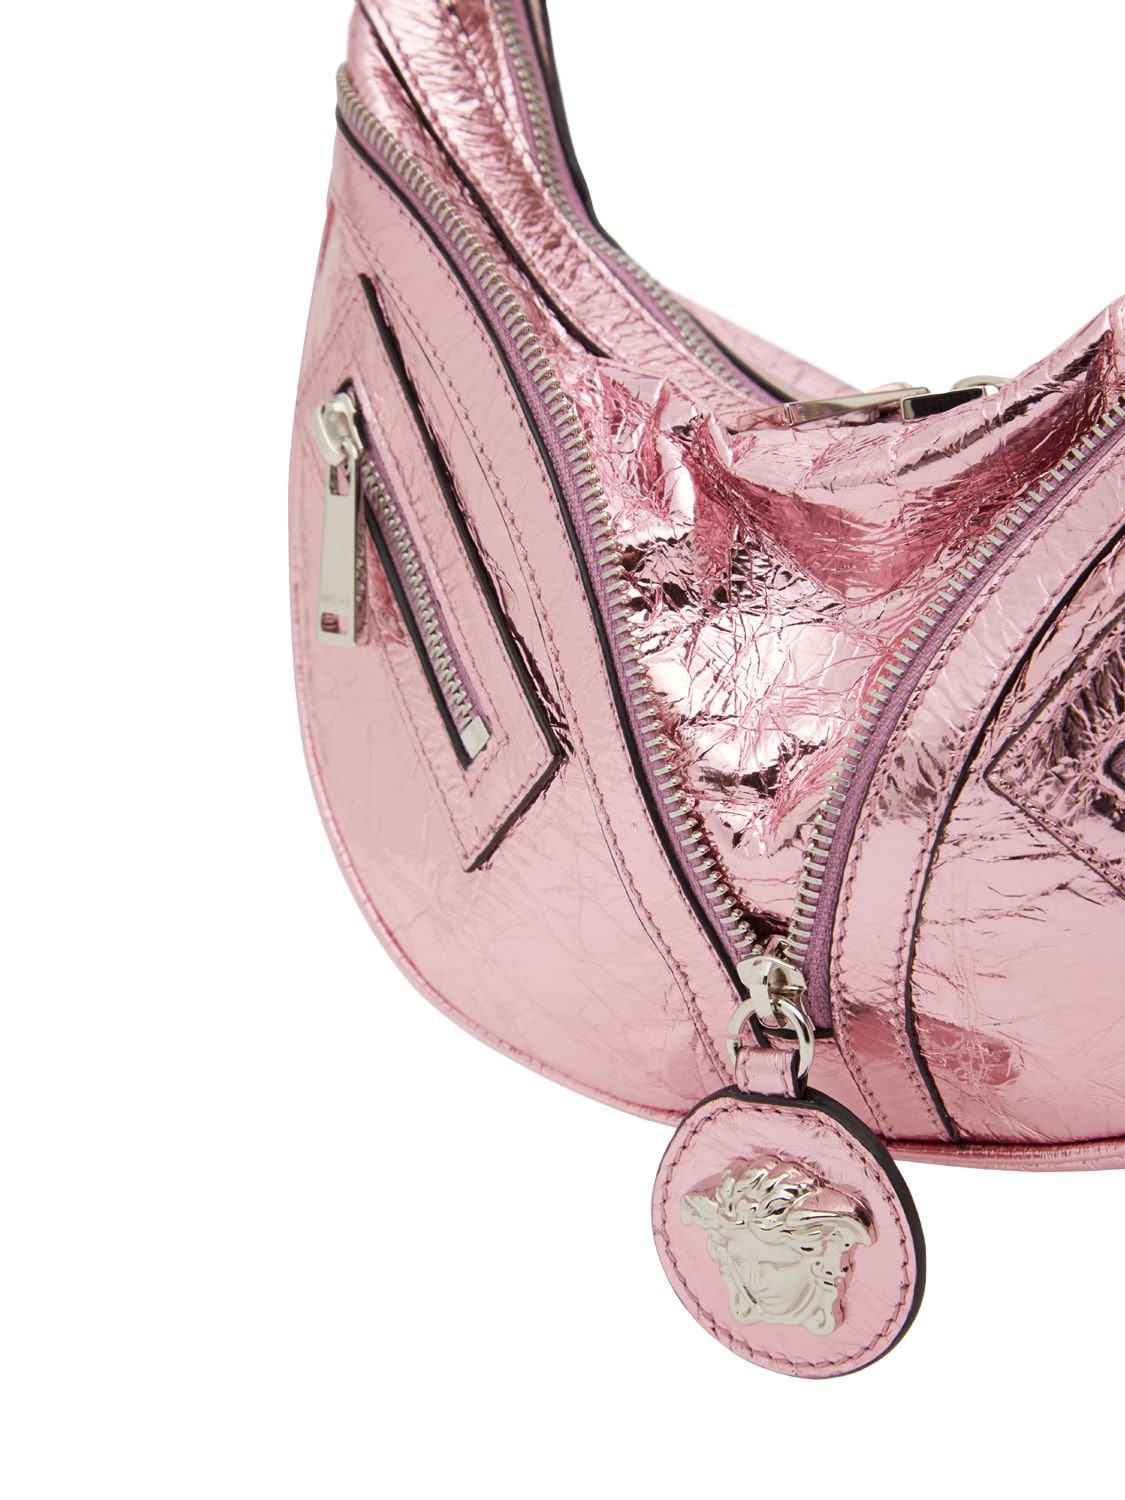 Shop Versace Small Repeat Metallic Leather Hobo Bag In Baby Pink